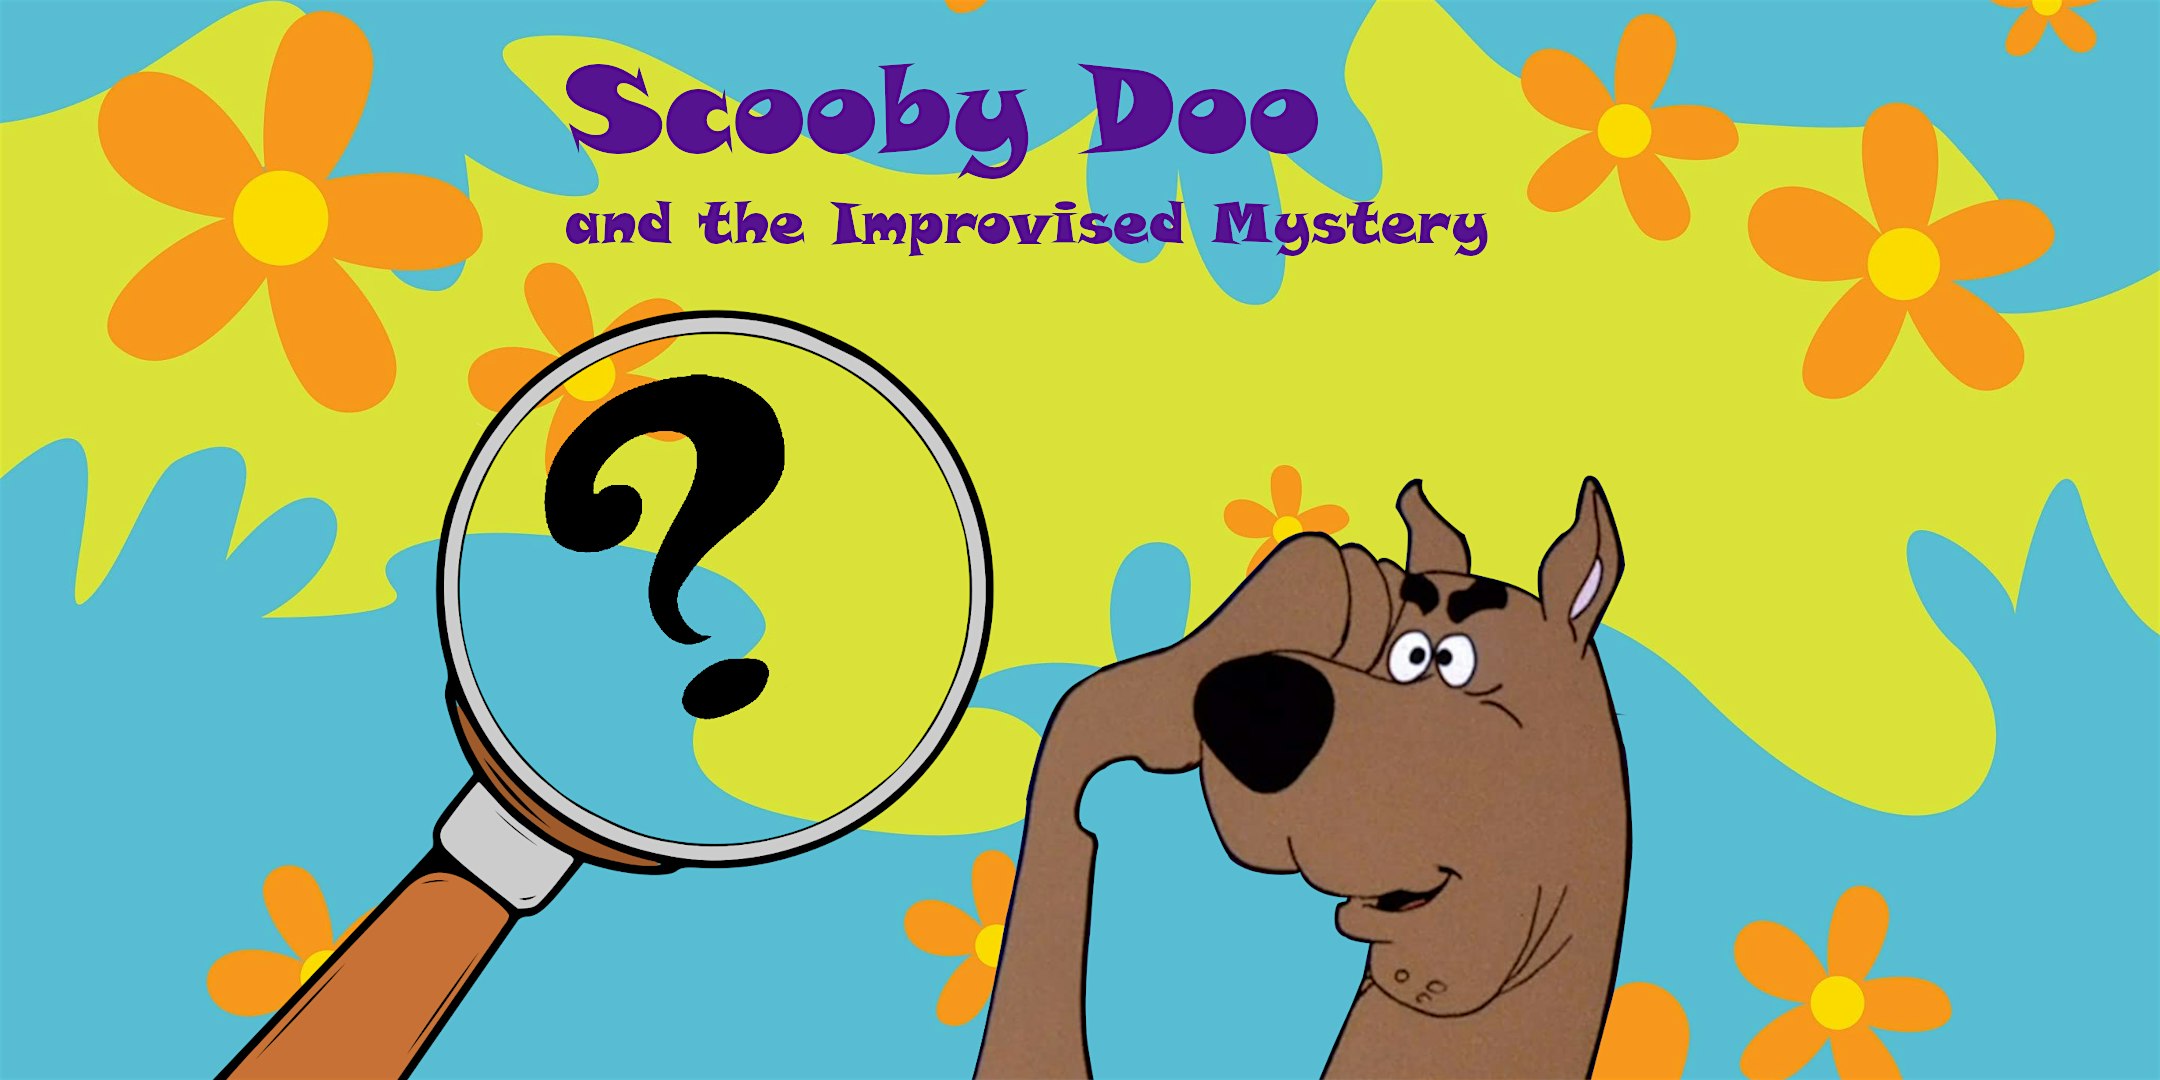 Scooby Doo and the Improvised Mystery - Improv Comedy Show